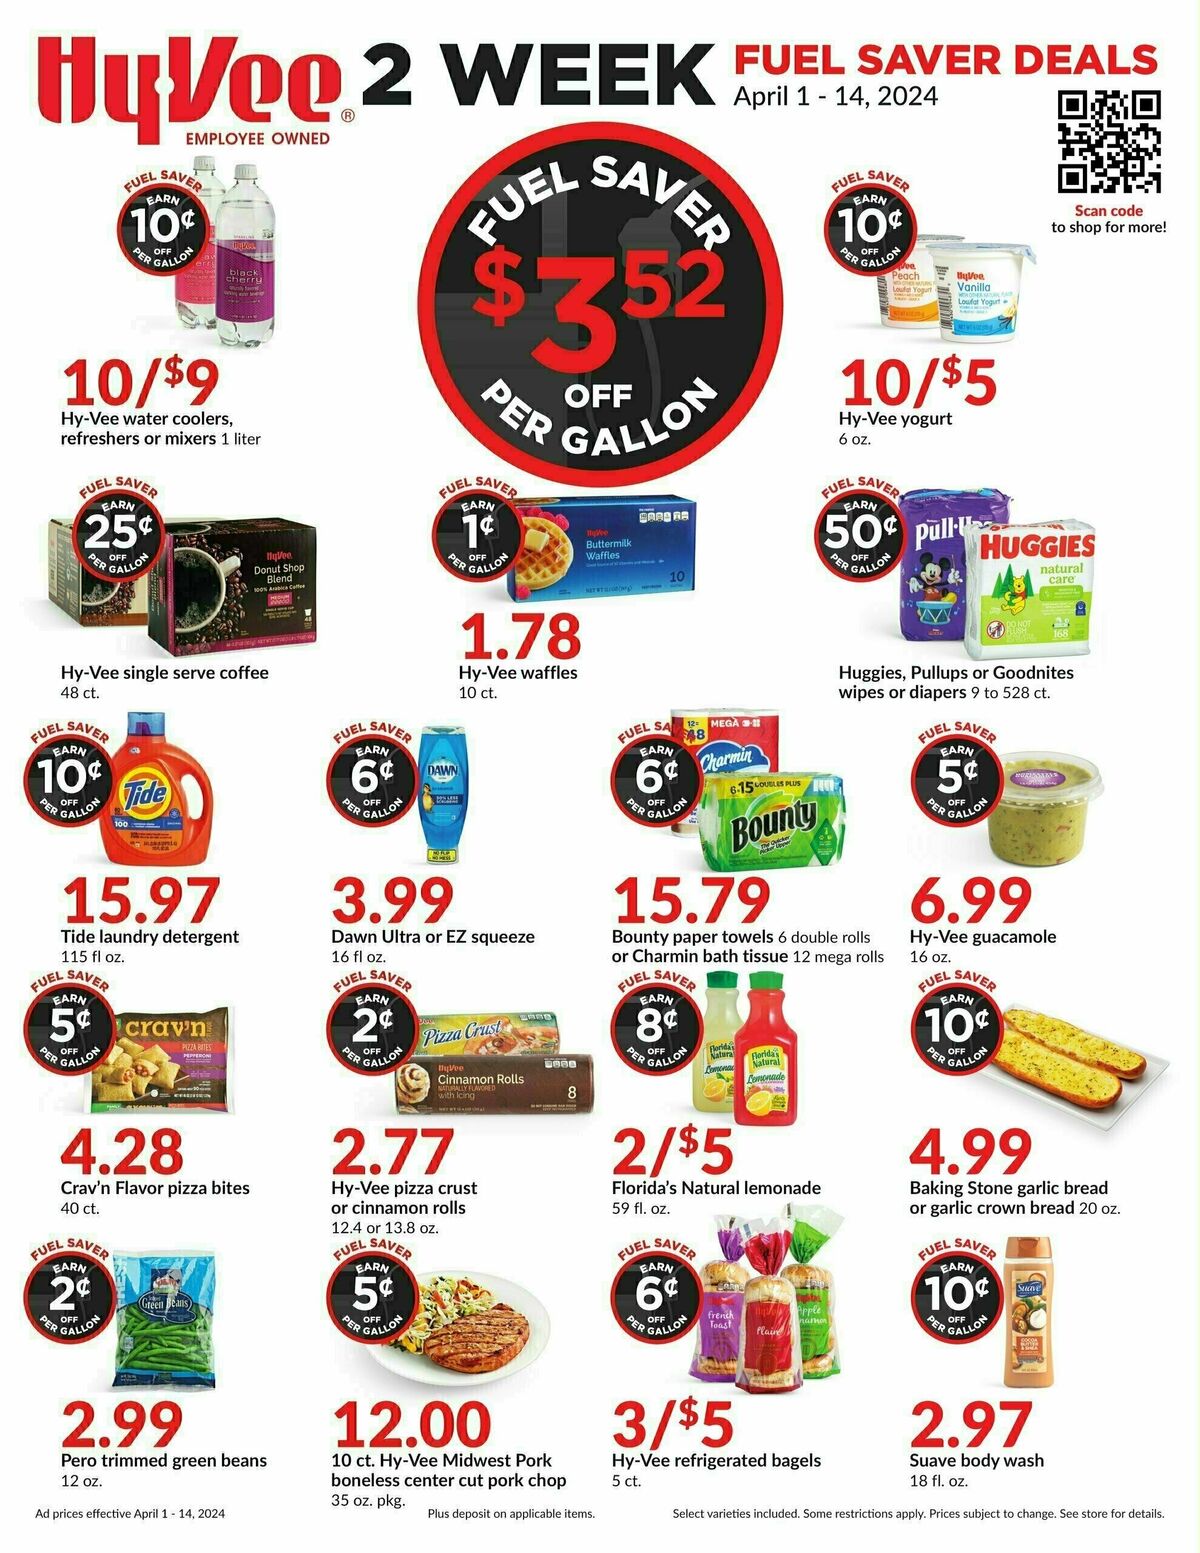 Hy-Vee 2 Week Fuel Saver Deals Weekly Ad from April 1